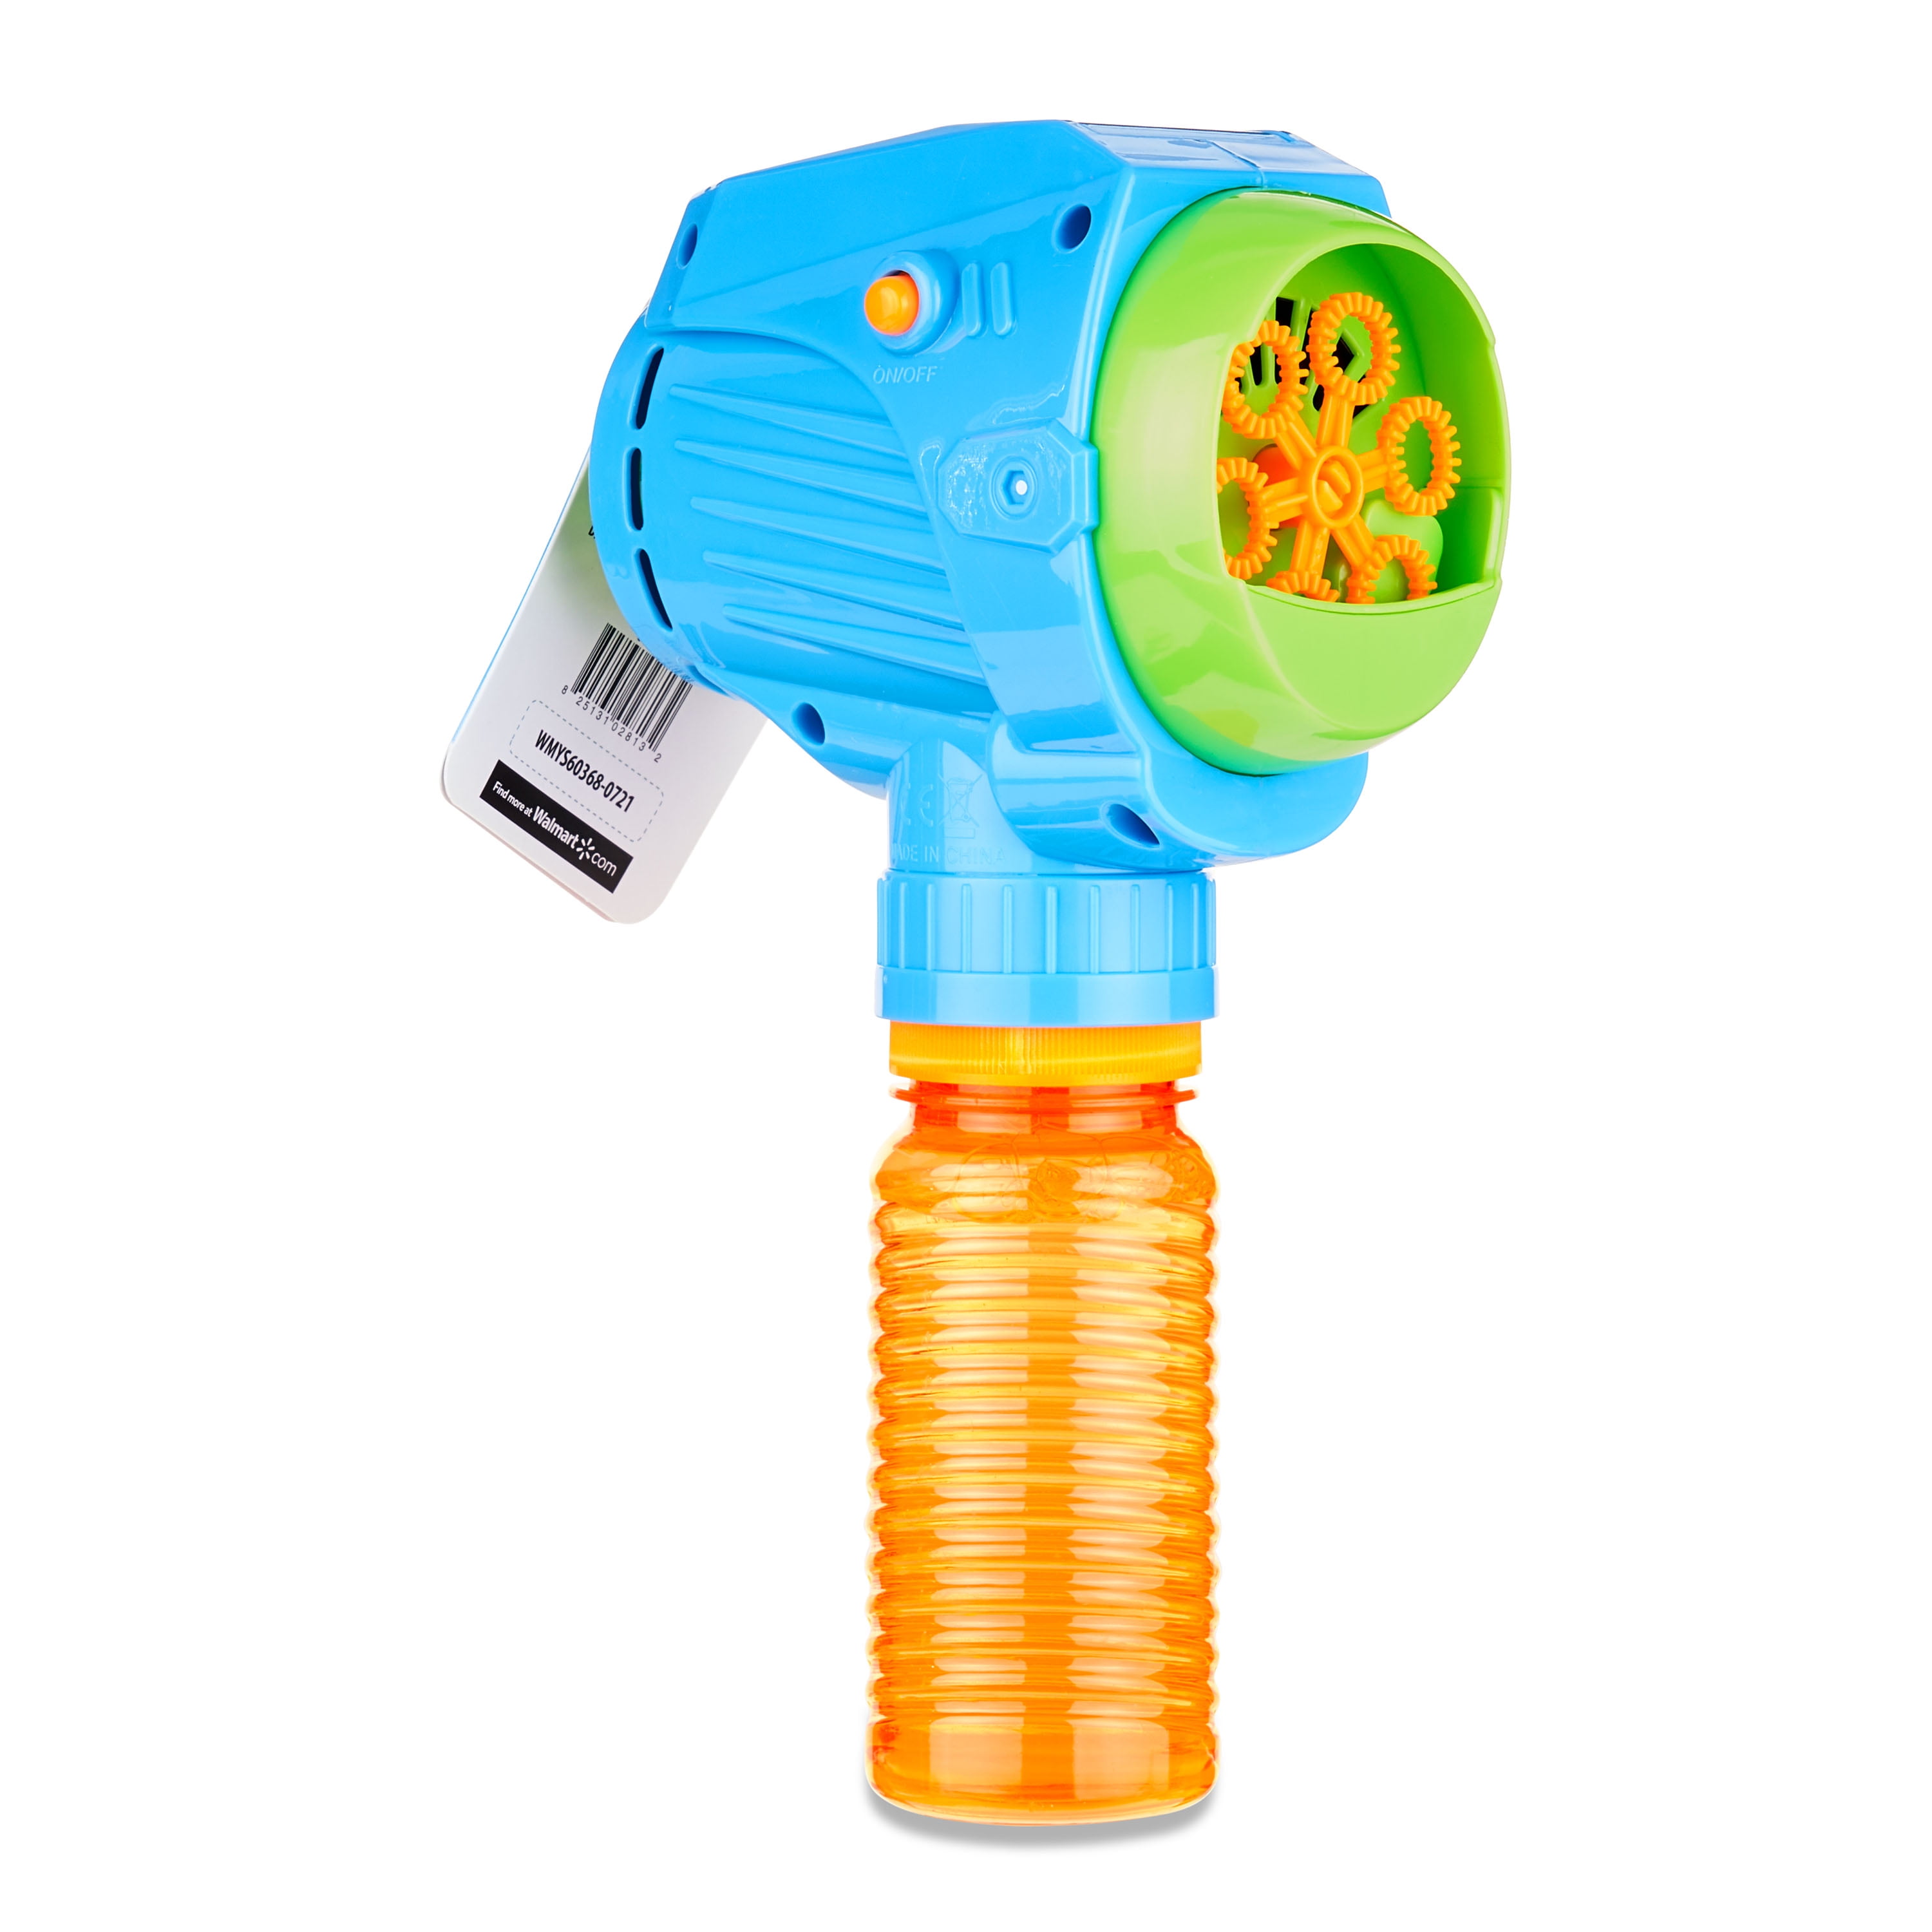 Bubble Blower Fan Machine Toy Sound and Light Bubble Gun Outdoor for Kids 